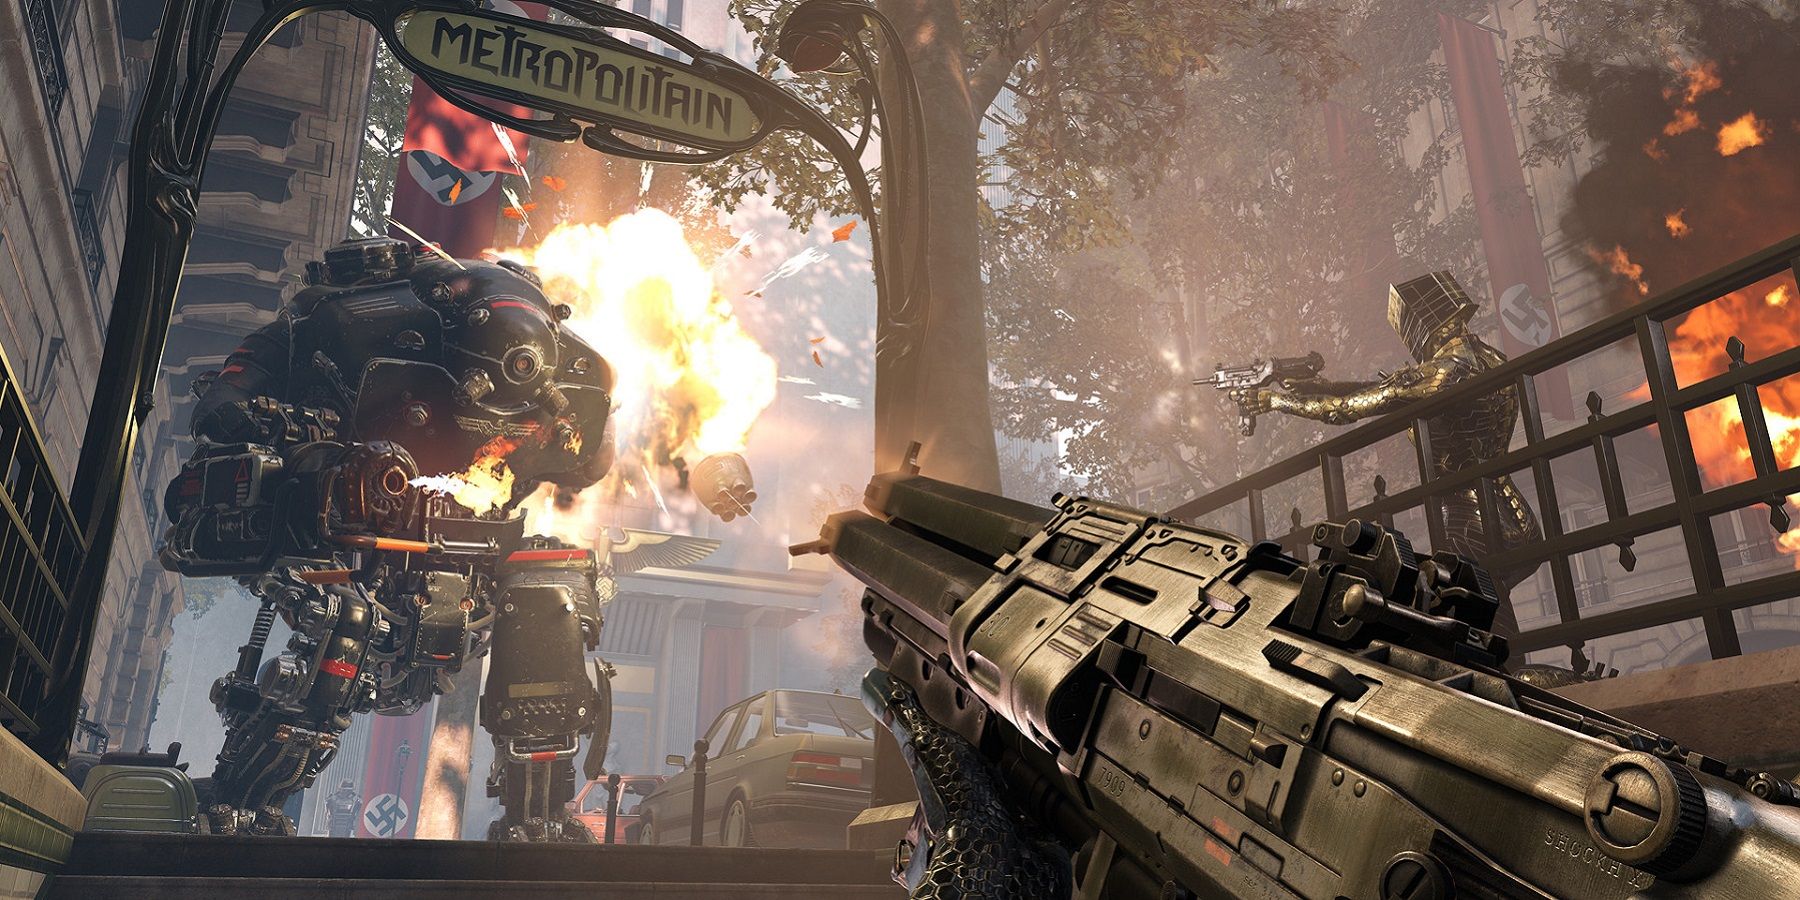 Image from Wolfenstein: Youngblood showing a mech soldier attacking the player.